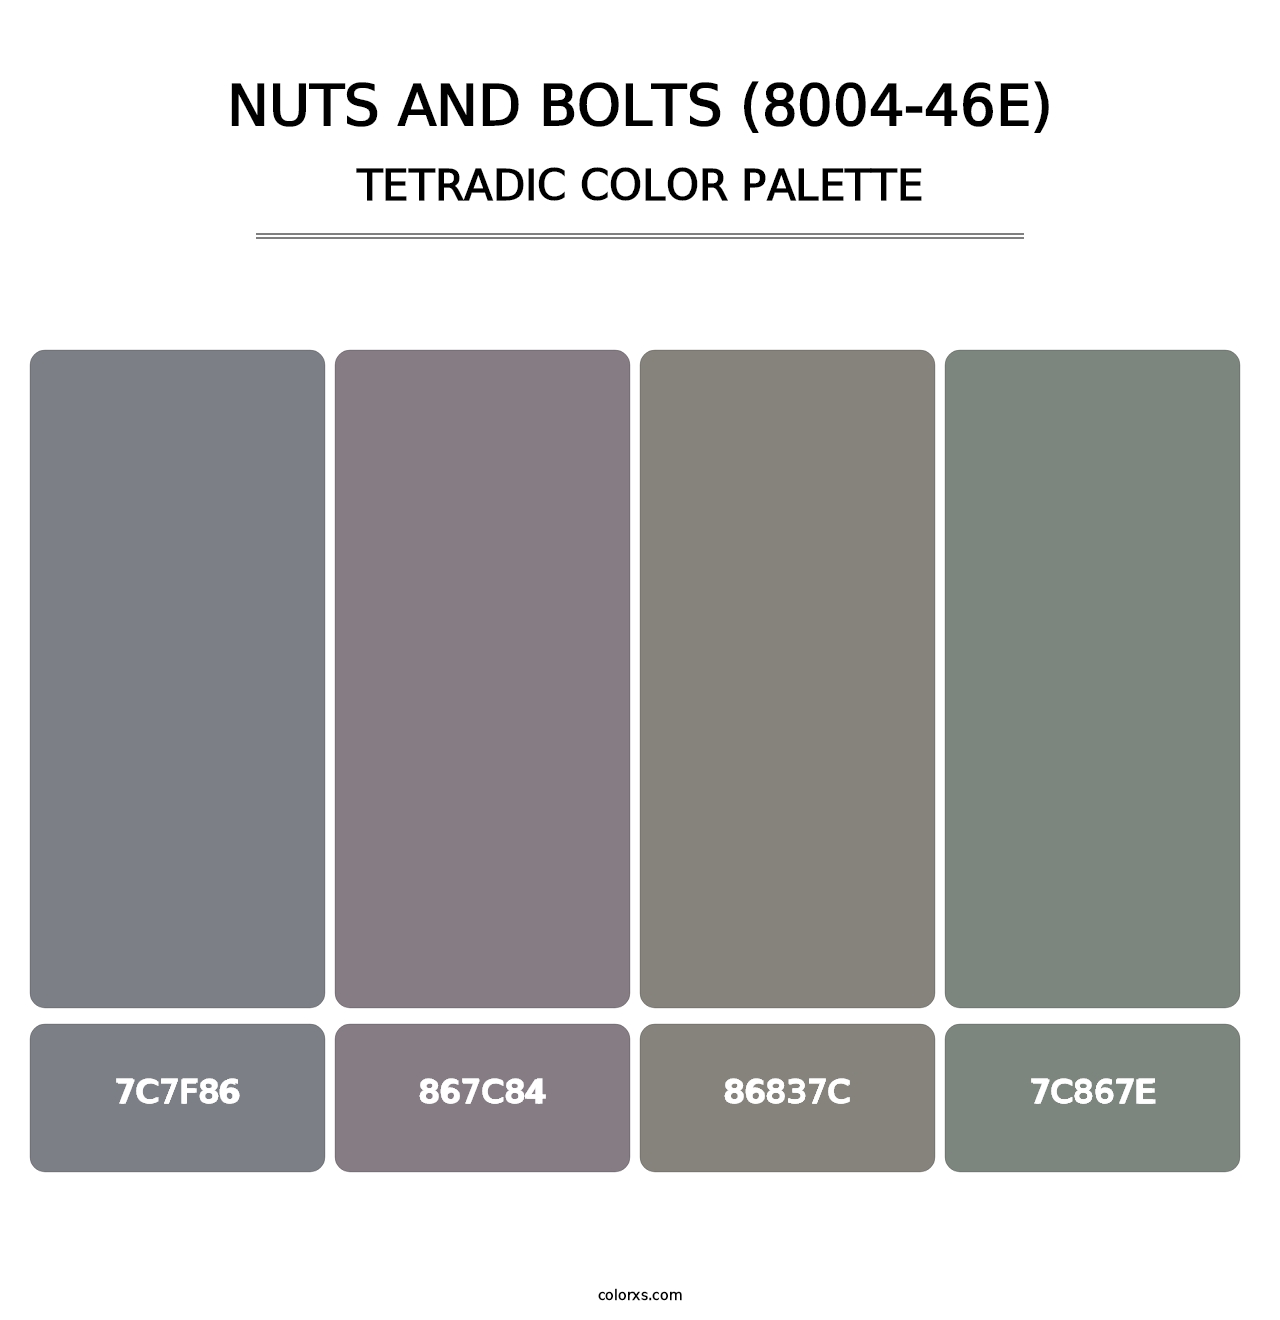 Nuts and Bolts (8004-46E) - Tetradic Color Palette